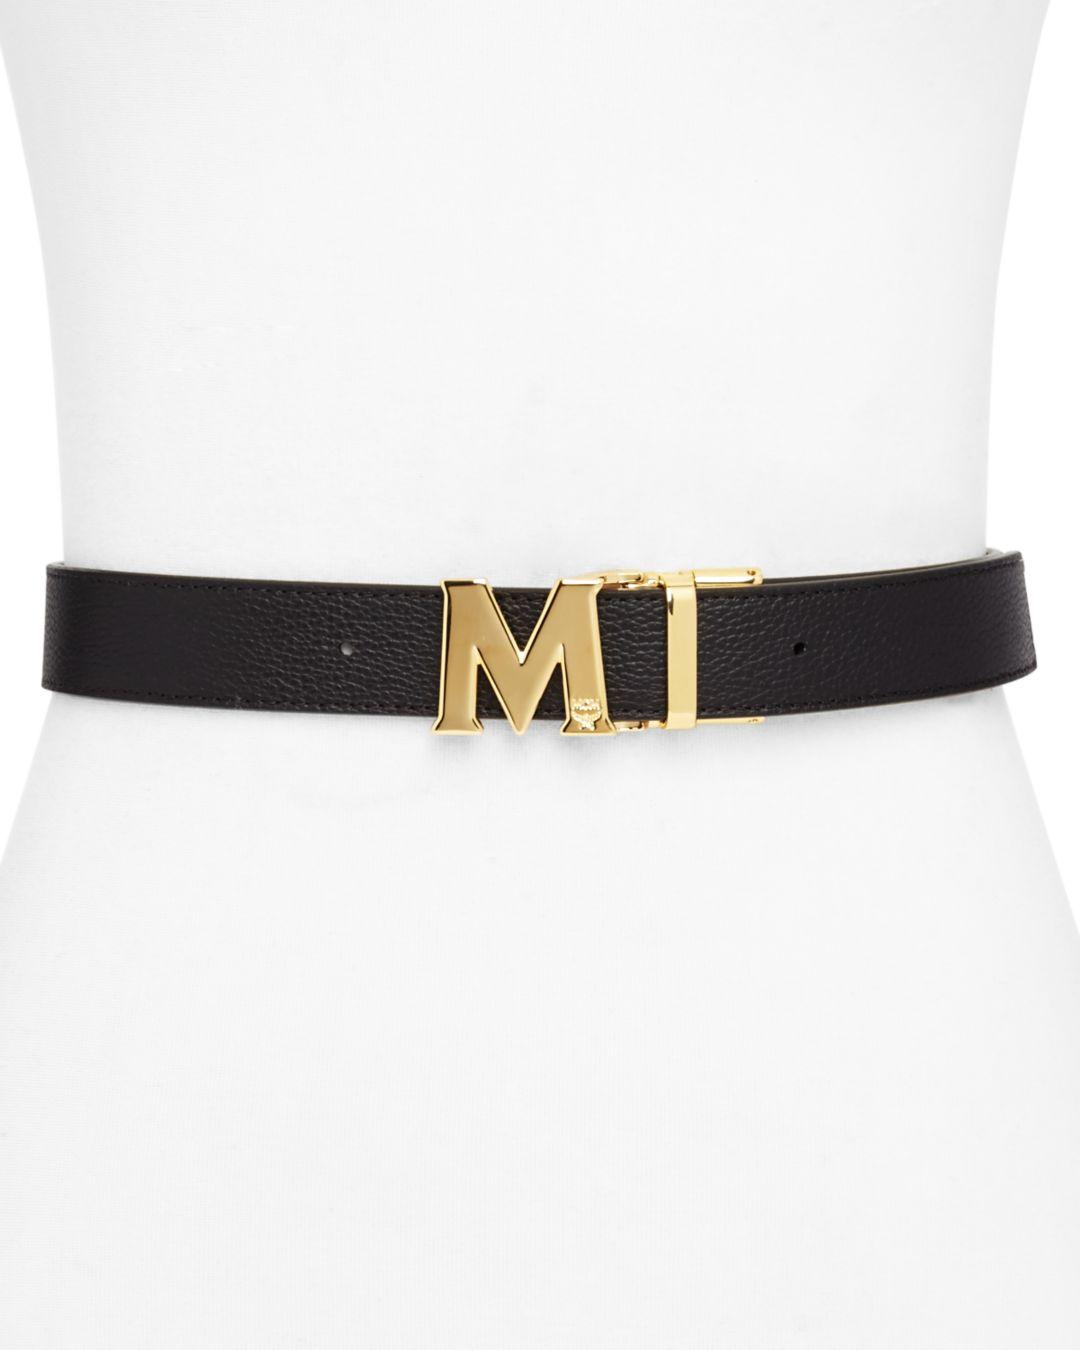 Mcm Belt Buckle Only | Paul Smith